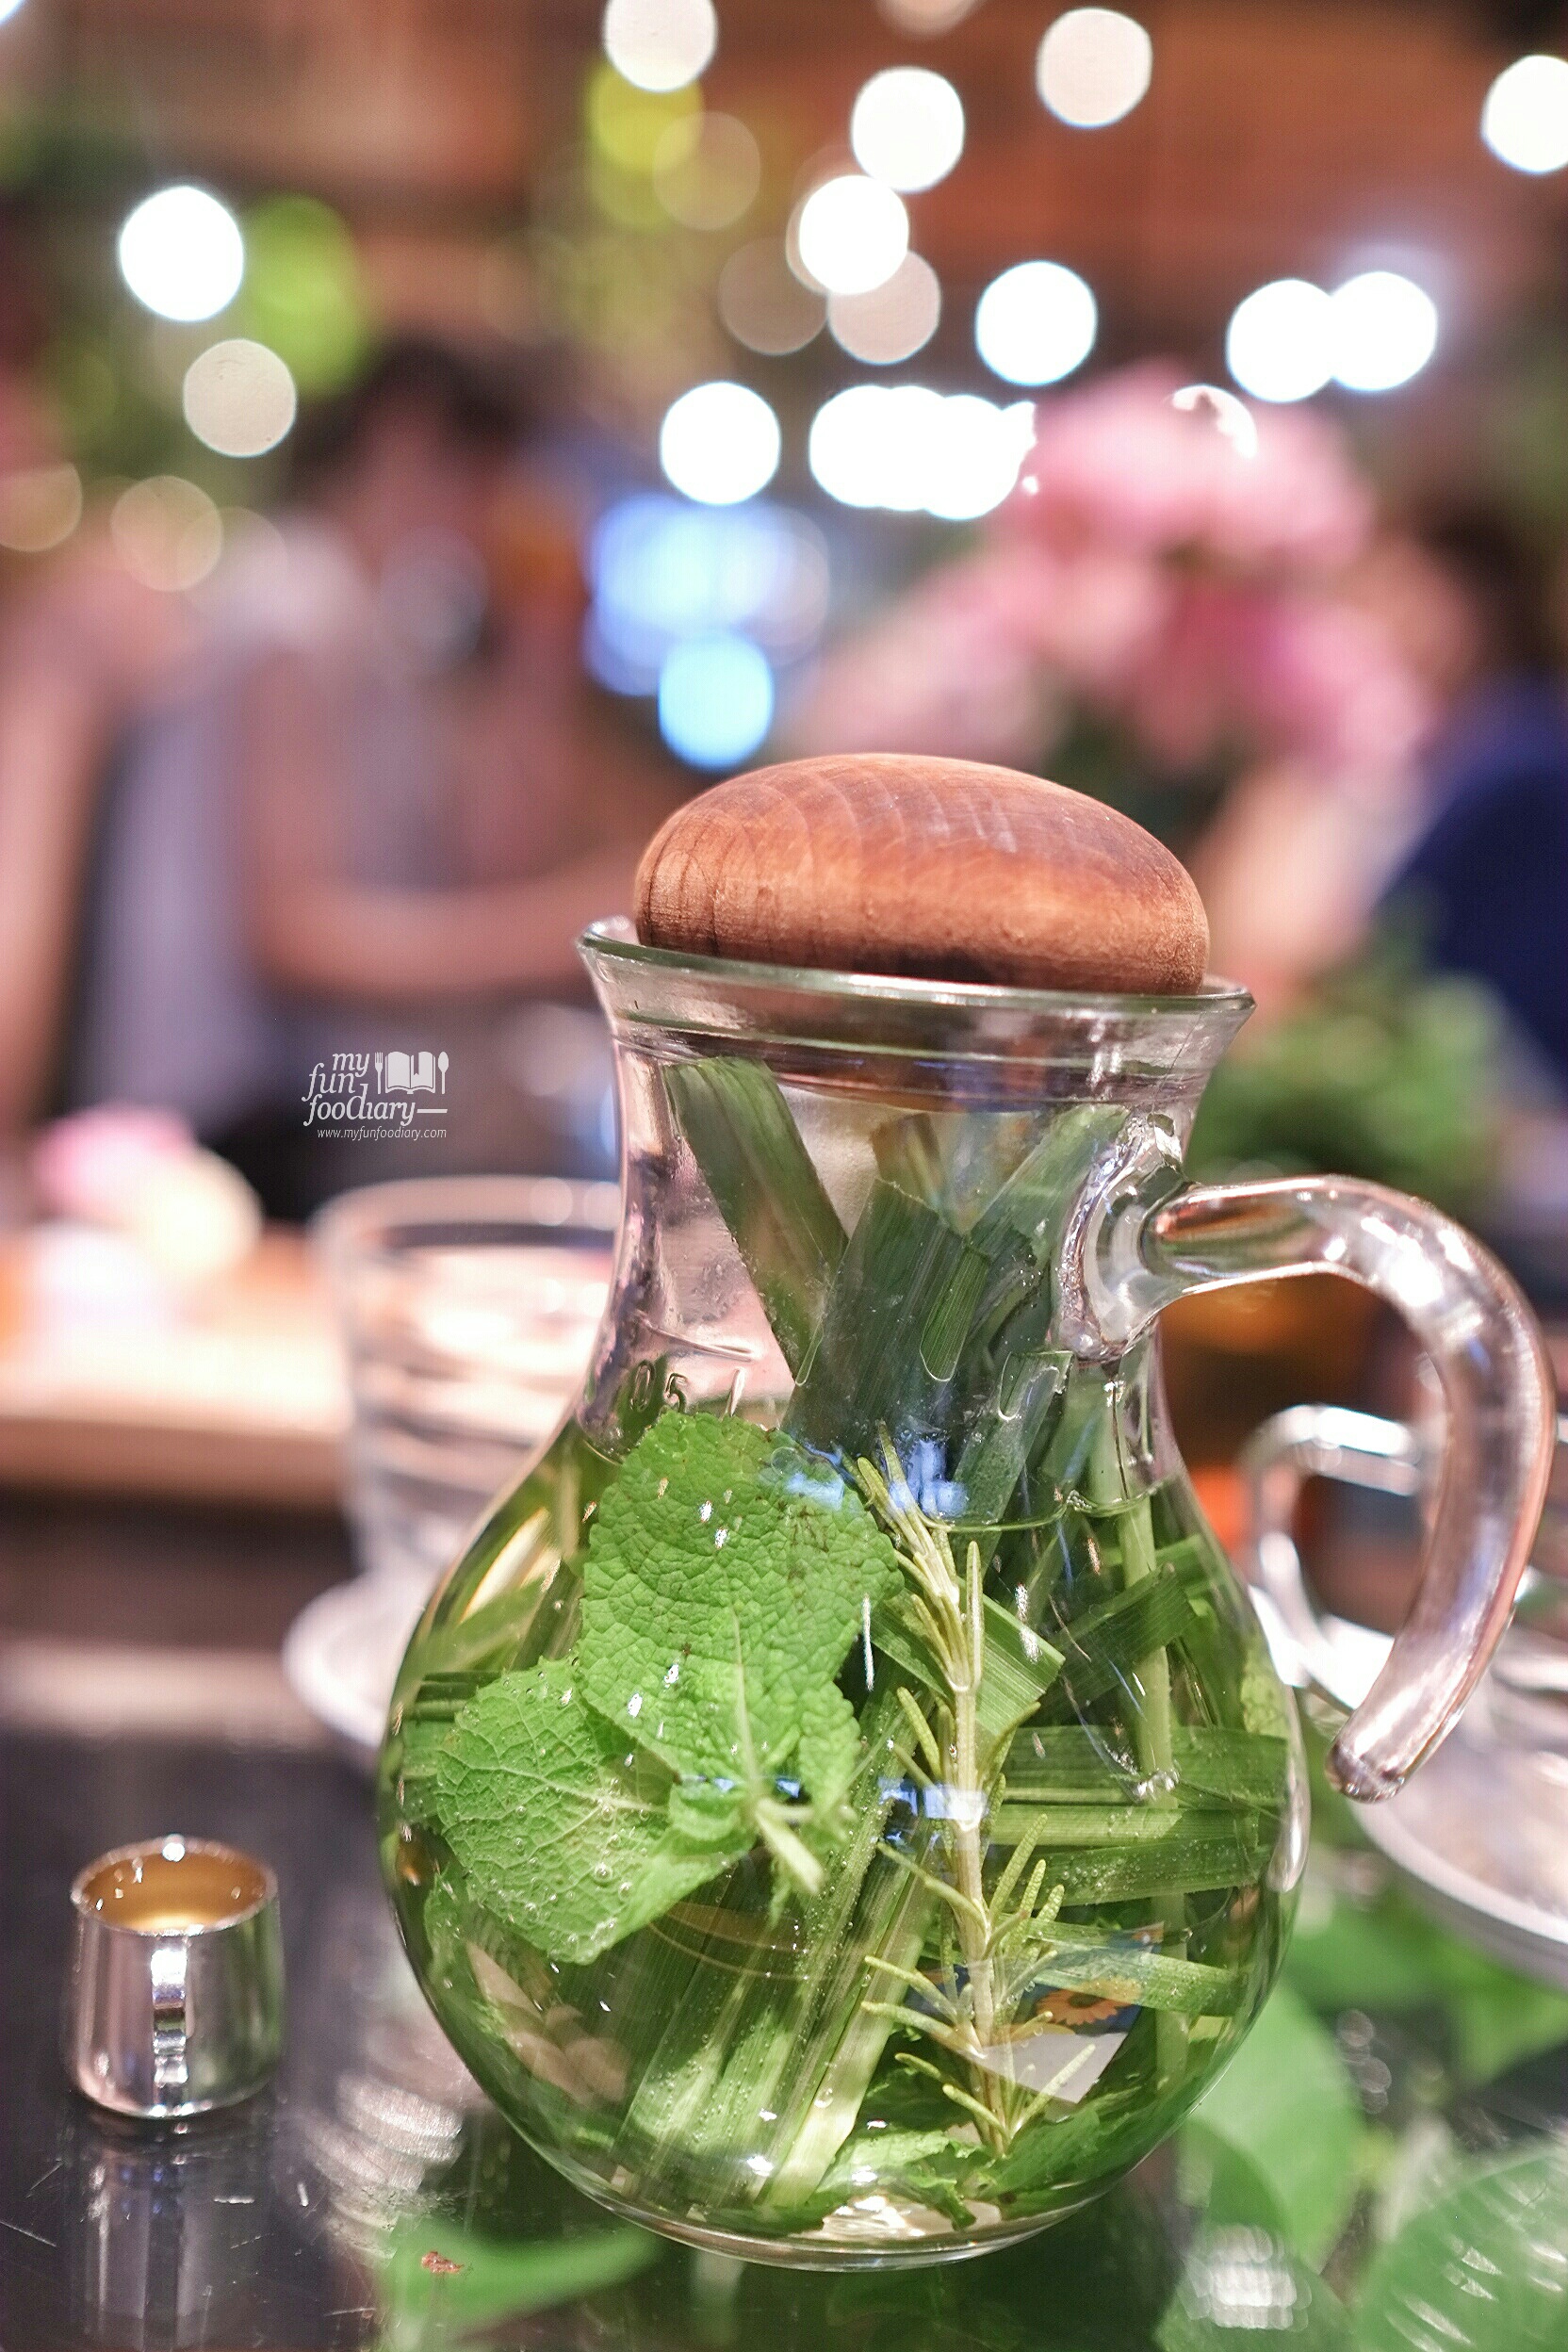 Refresh Blend at Aoyama Flower Market in Tokyo Japan by Myfunfoodiary